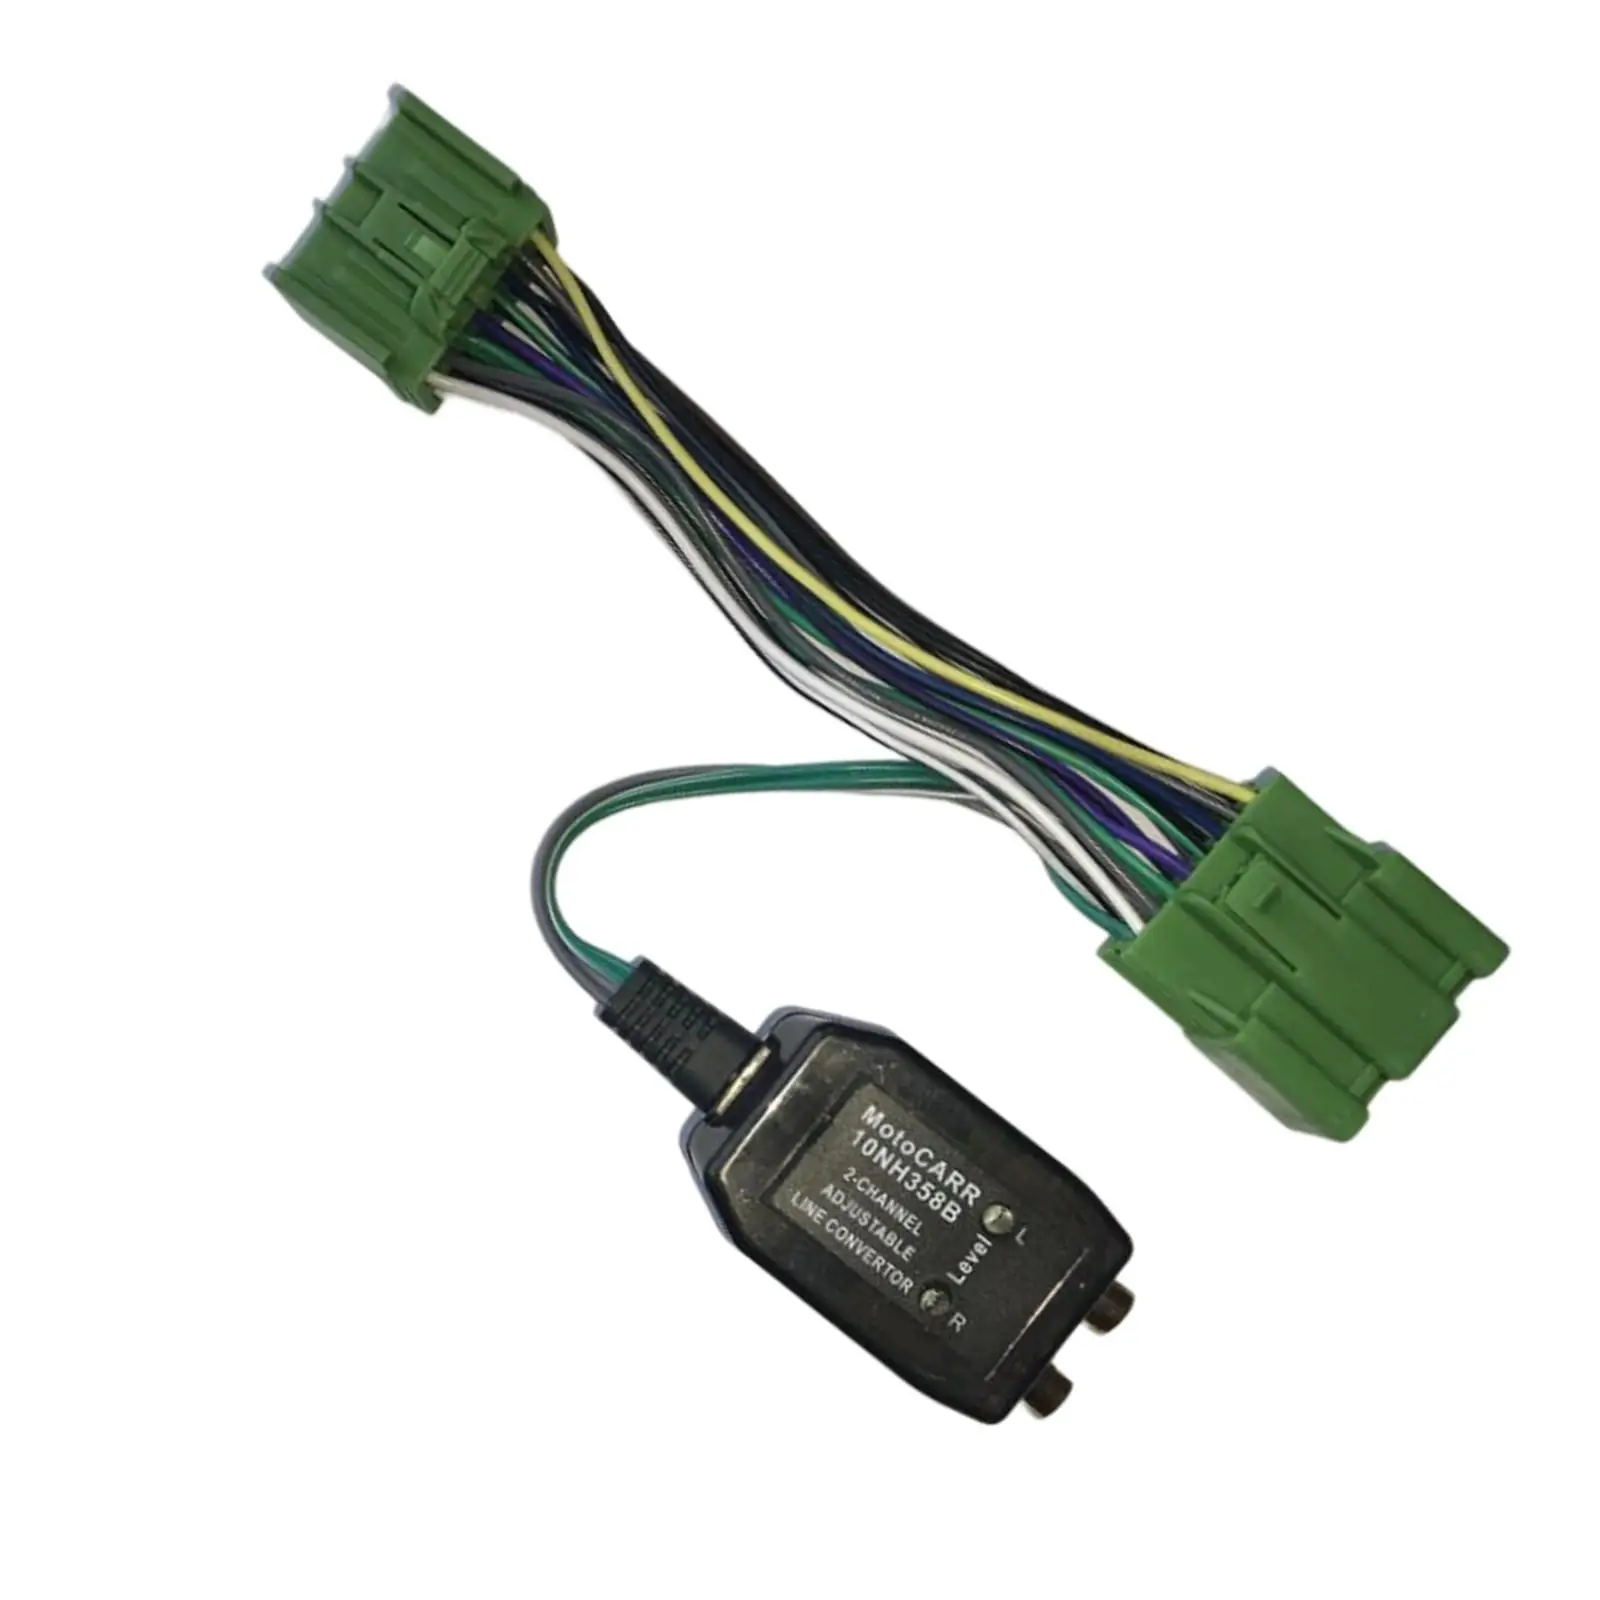 71-2107 Aftermarket Radio Wiring Harness Add Amplifier Adapter Interface Amp Select for Direct Replaces Supplies Parts